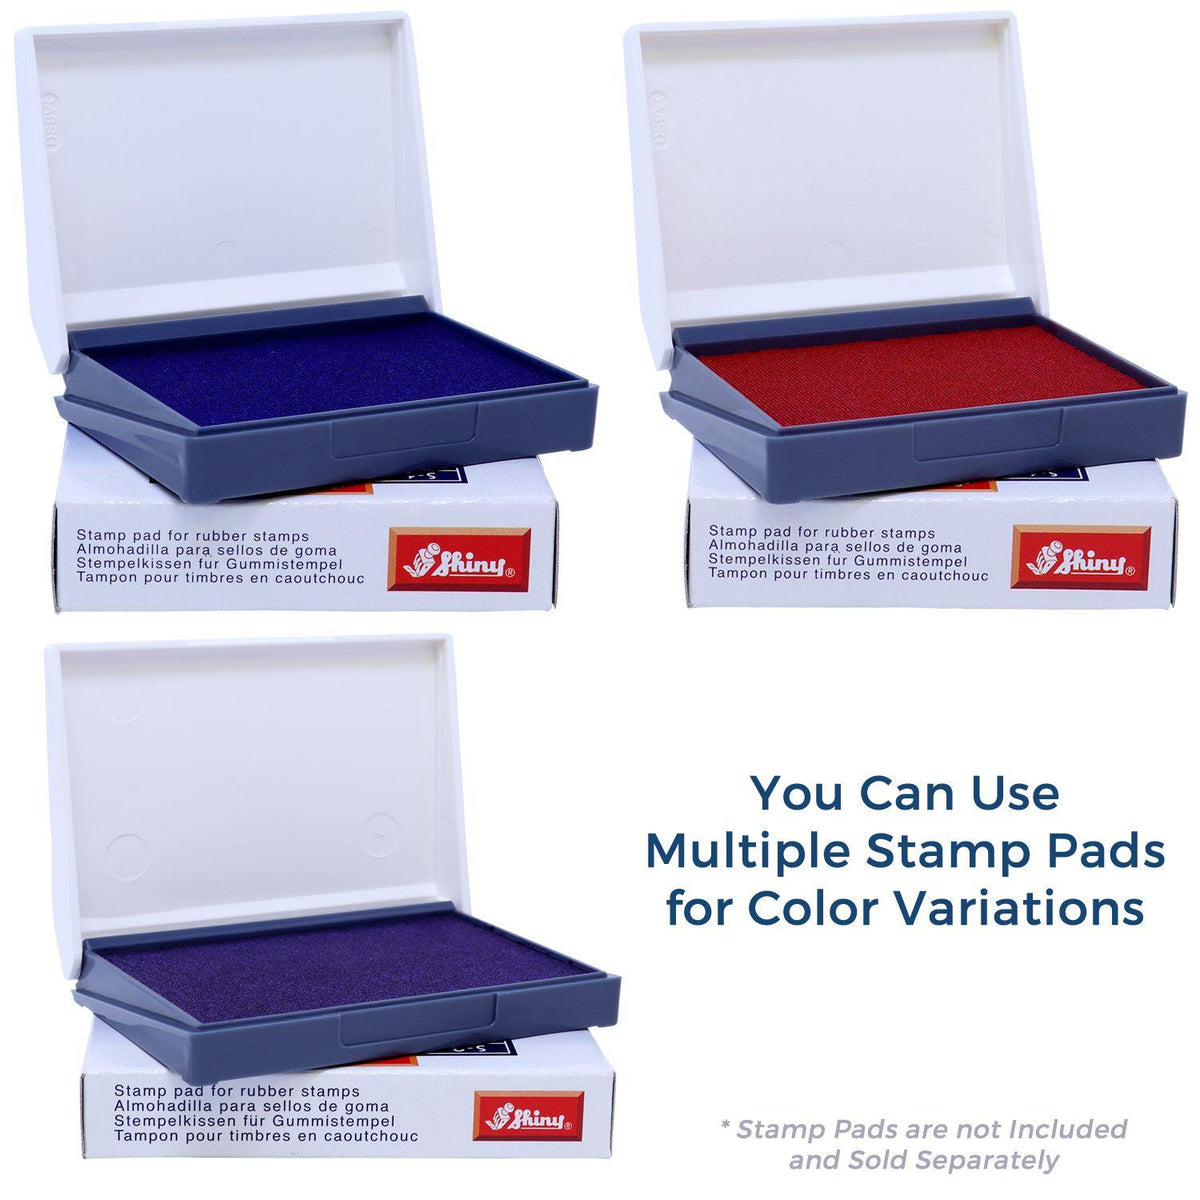 Stamp Pads for Large Air Mail Rubber Stamp Available